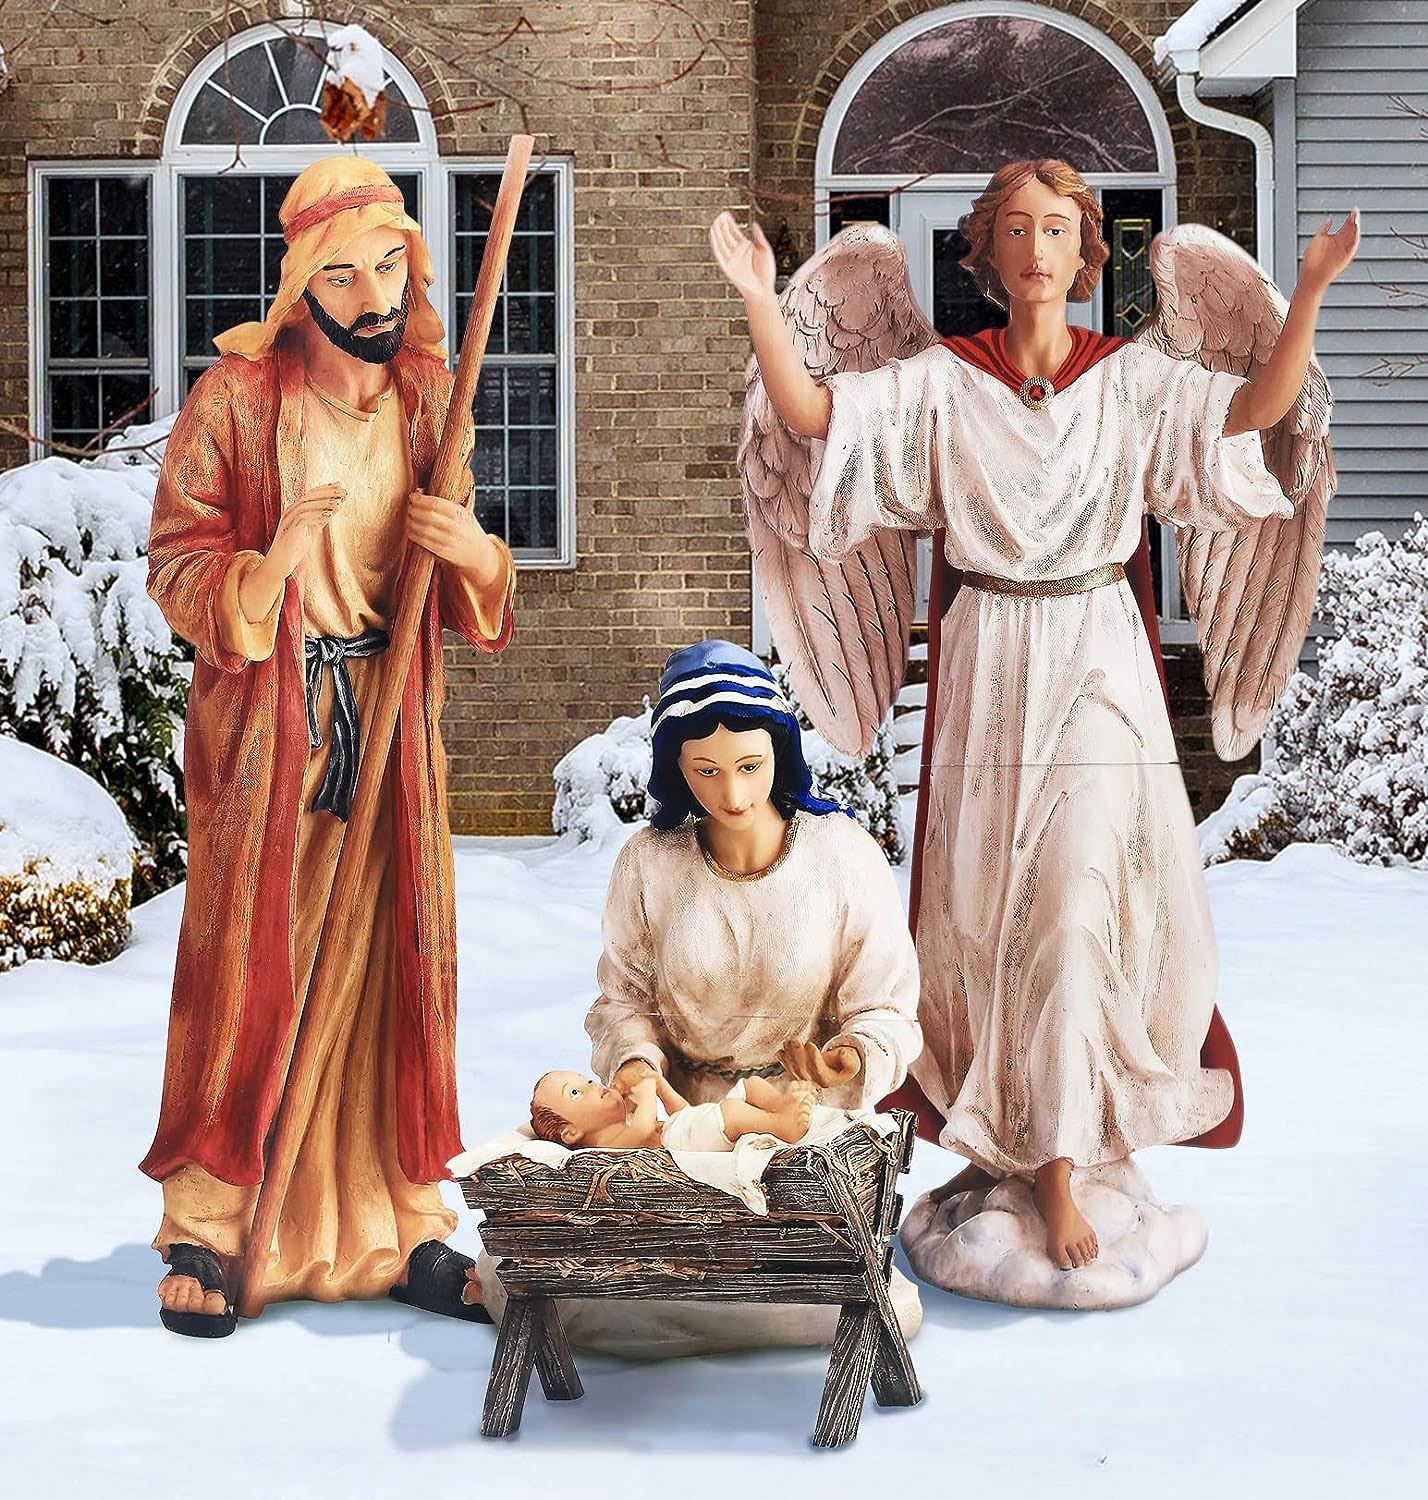 https://shop.catholicsupply.com/resize/Shared/Images/Product/4-Piece-Holy-Family-and-Angel-Nativity-Figure-Stakes/118294google.jpg?